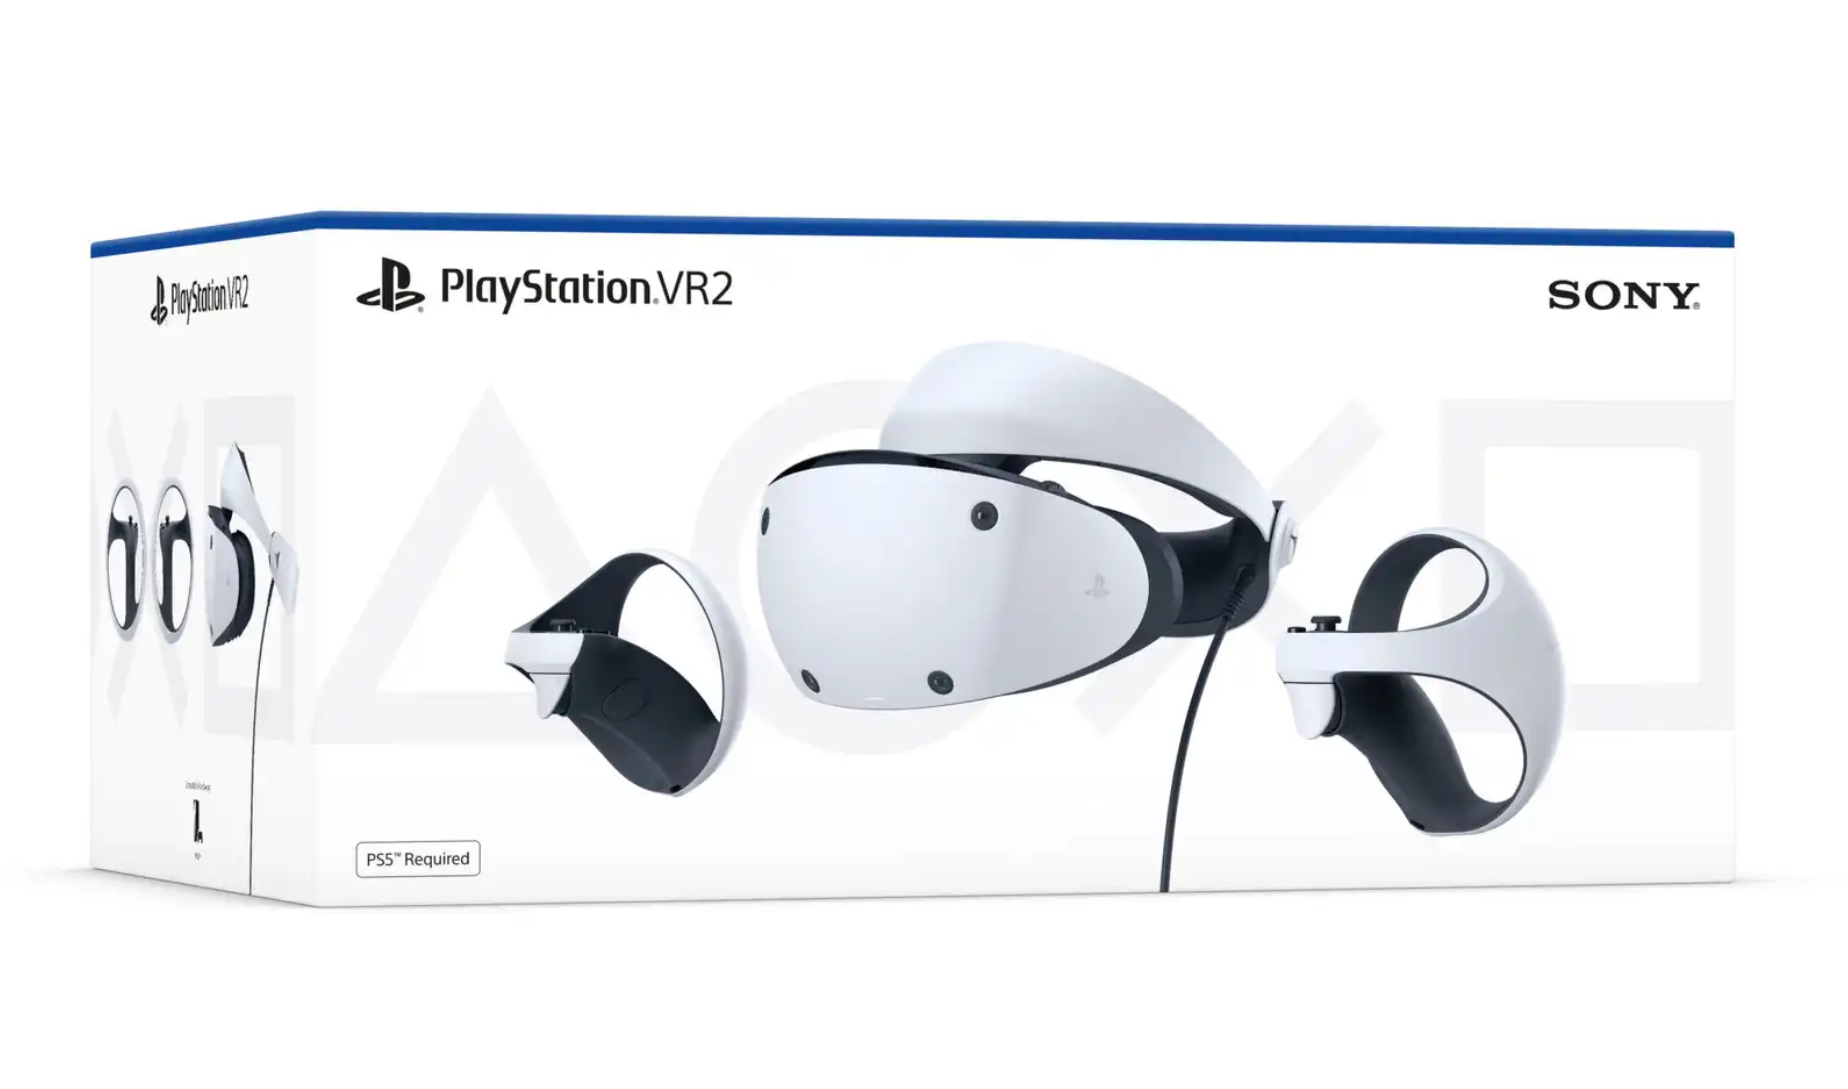 PlayStation VR2 Launches February, Pricier Than PS5 – channelnews